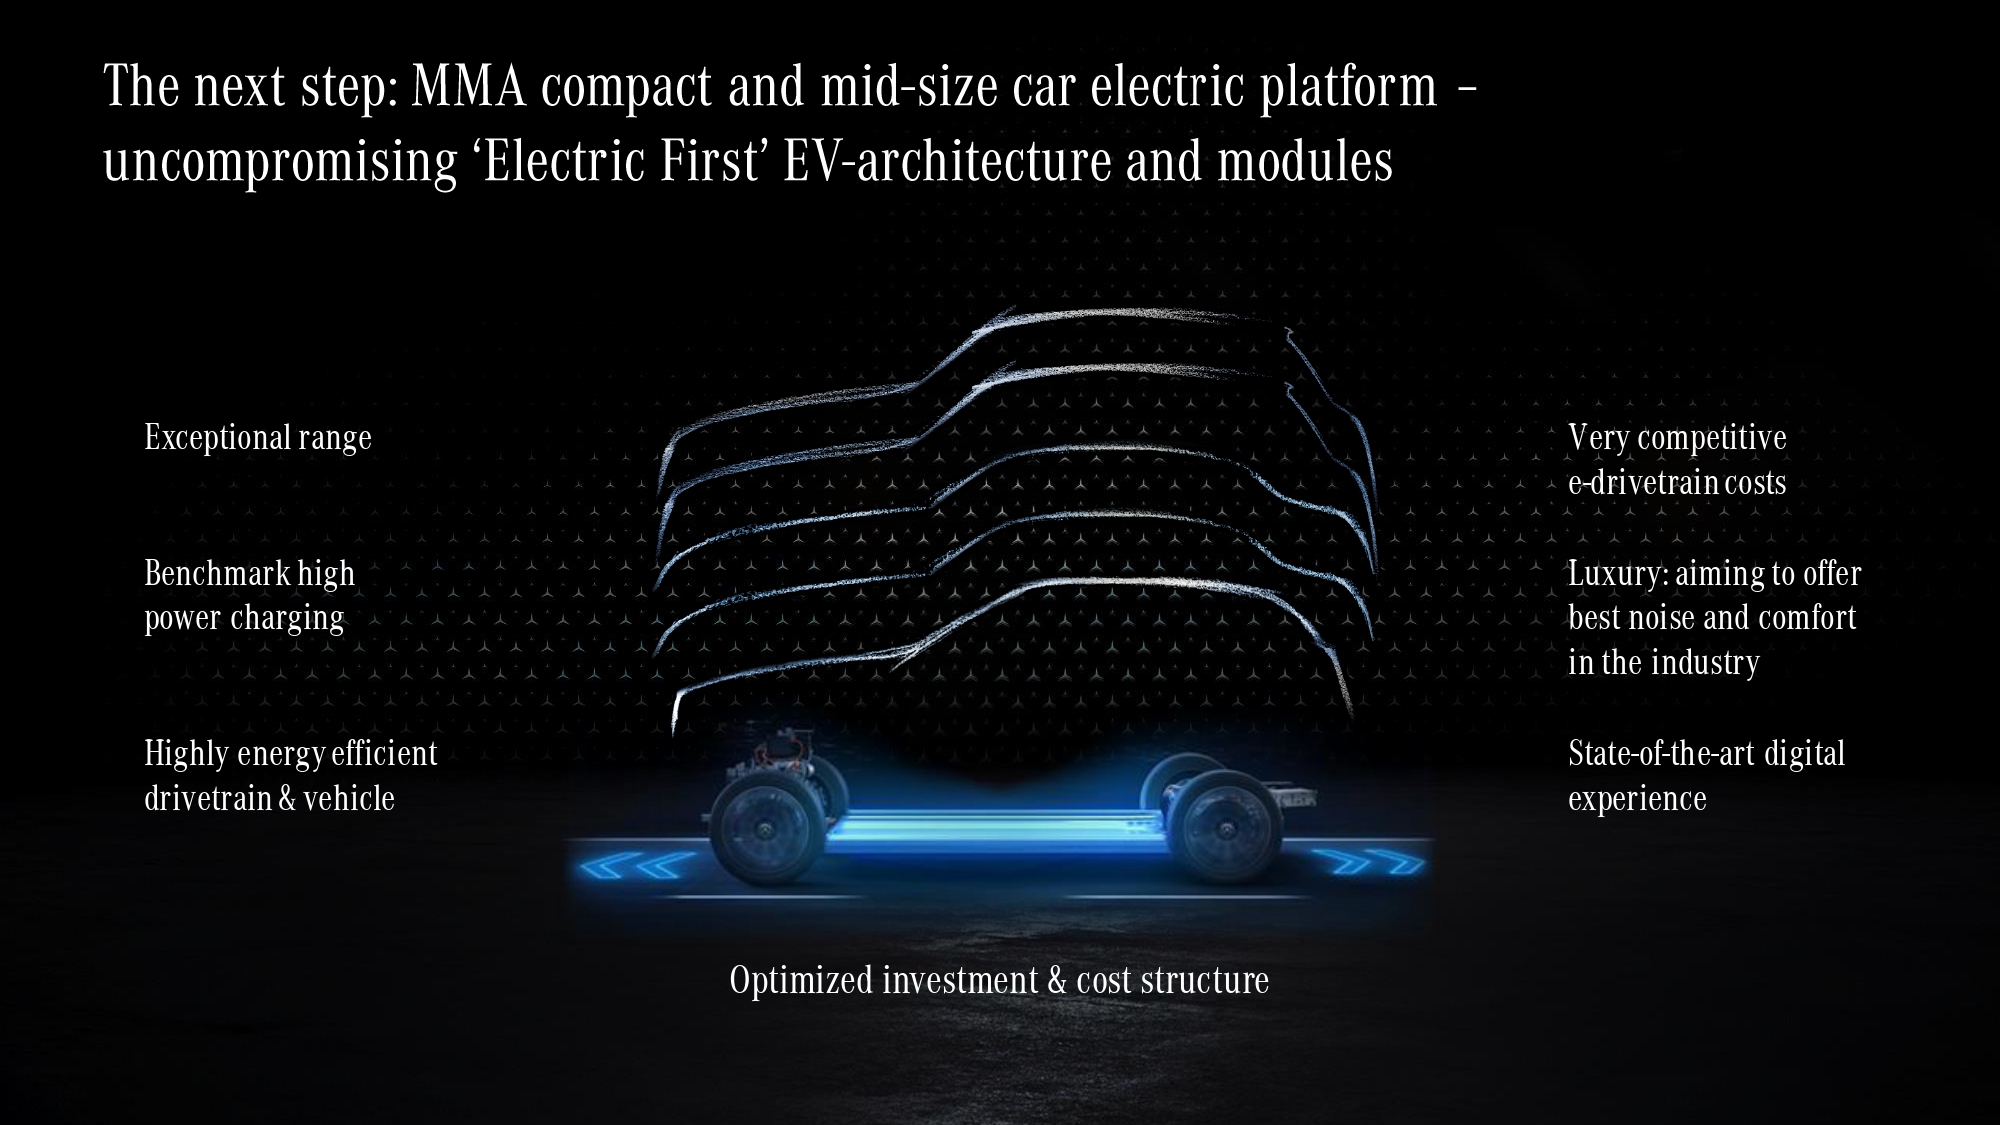 Mercedes-Benz-2020-product-strategy-electric-drive-6